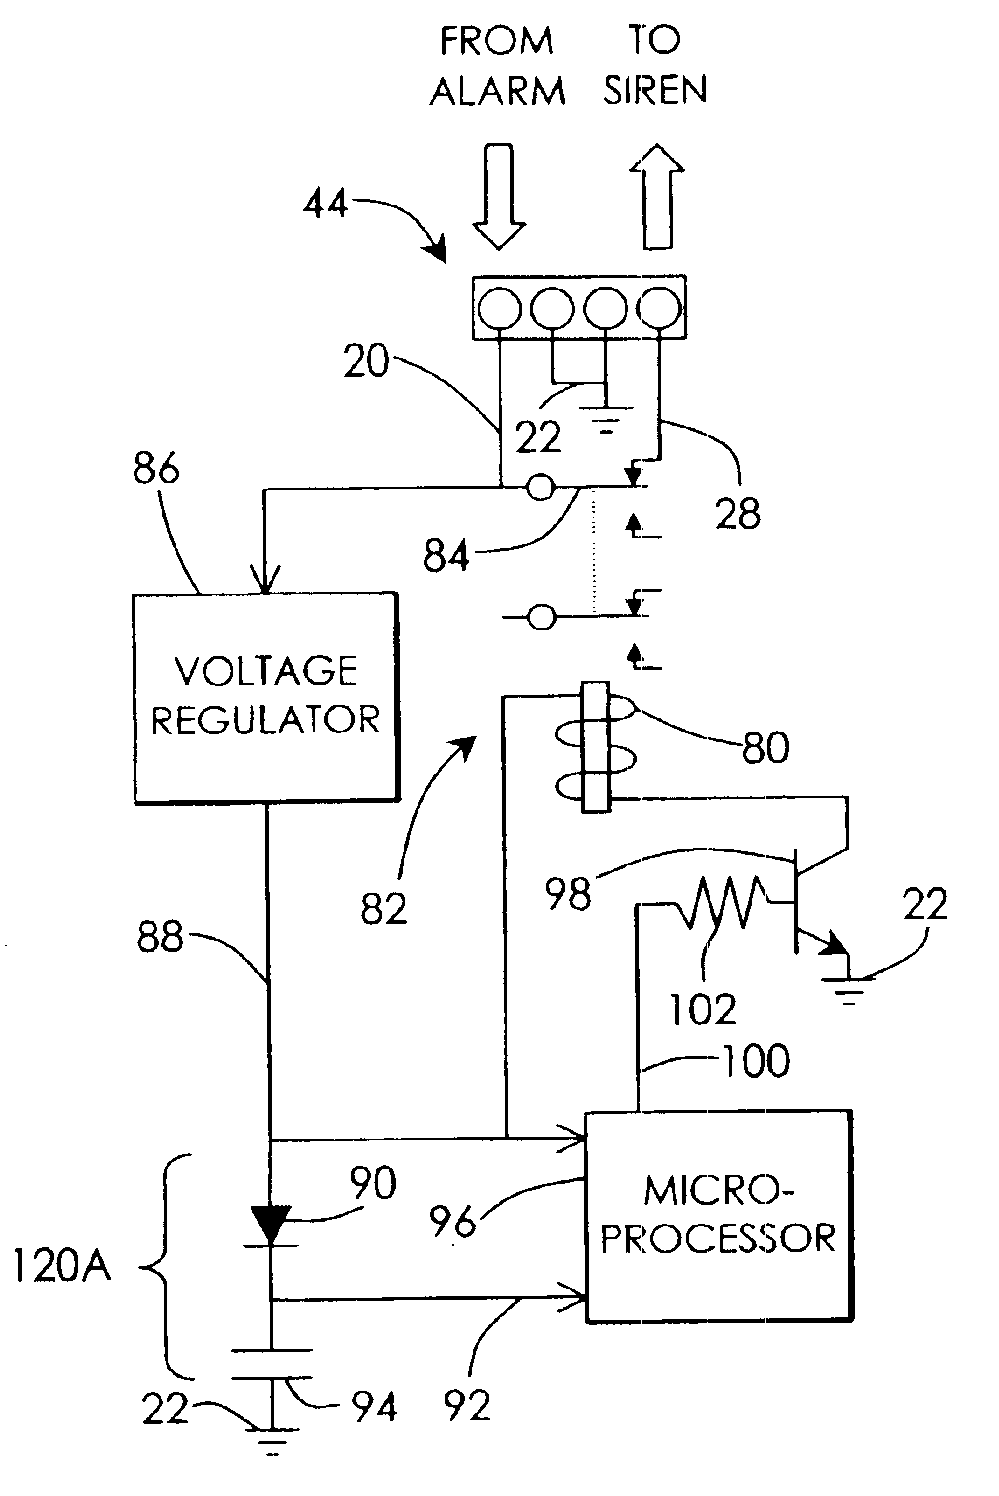 Automatic siren silencing device for false alarms